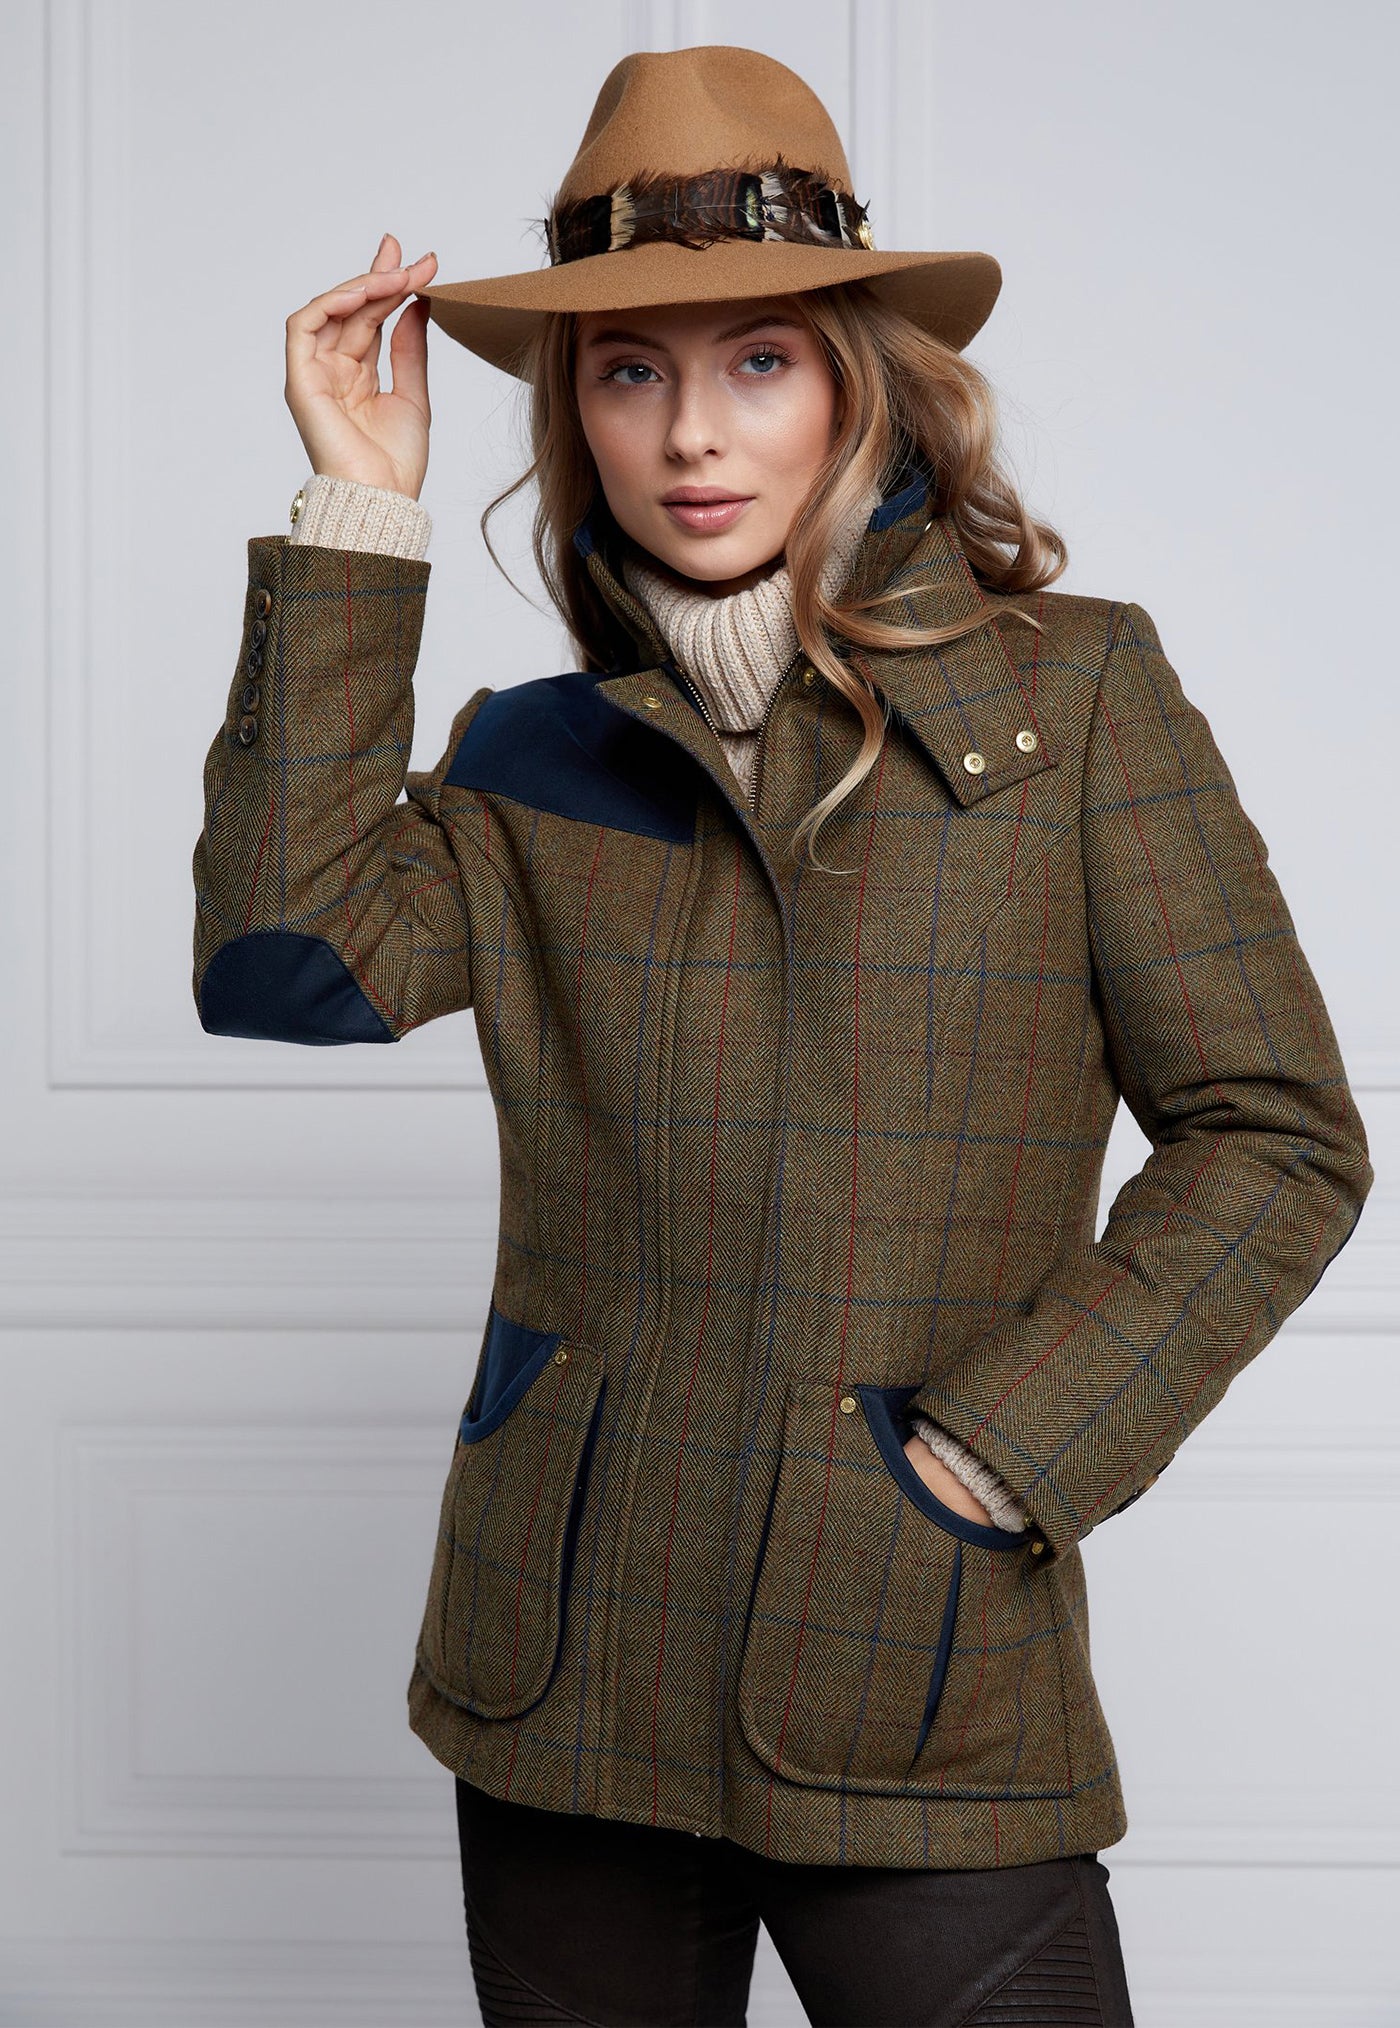 Country Classic Jacket - Glen Green Check sold by Angel Divine